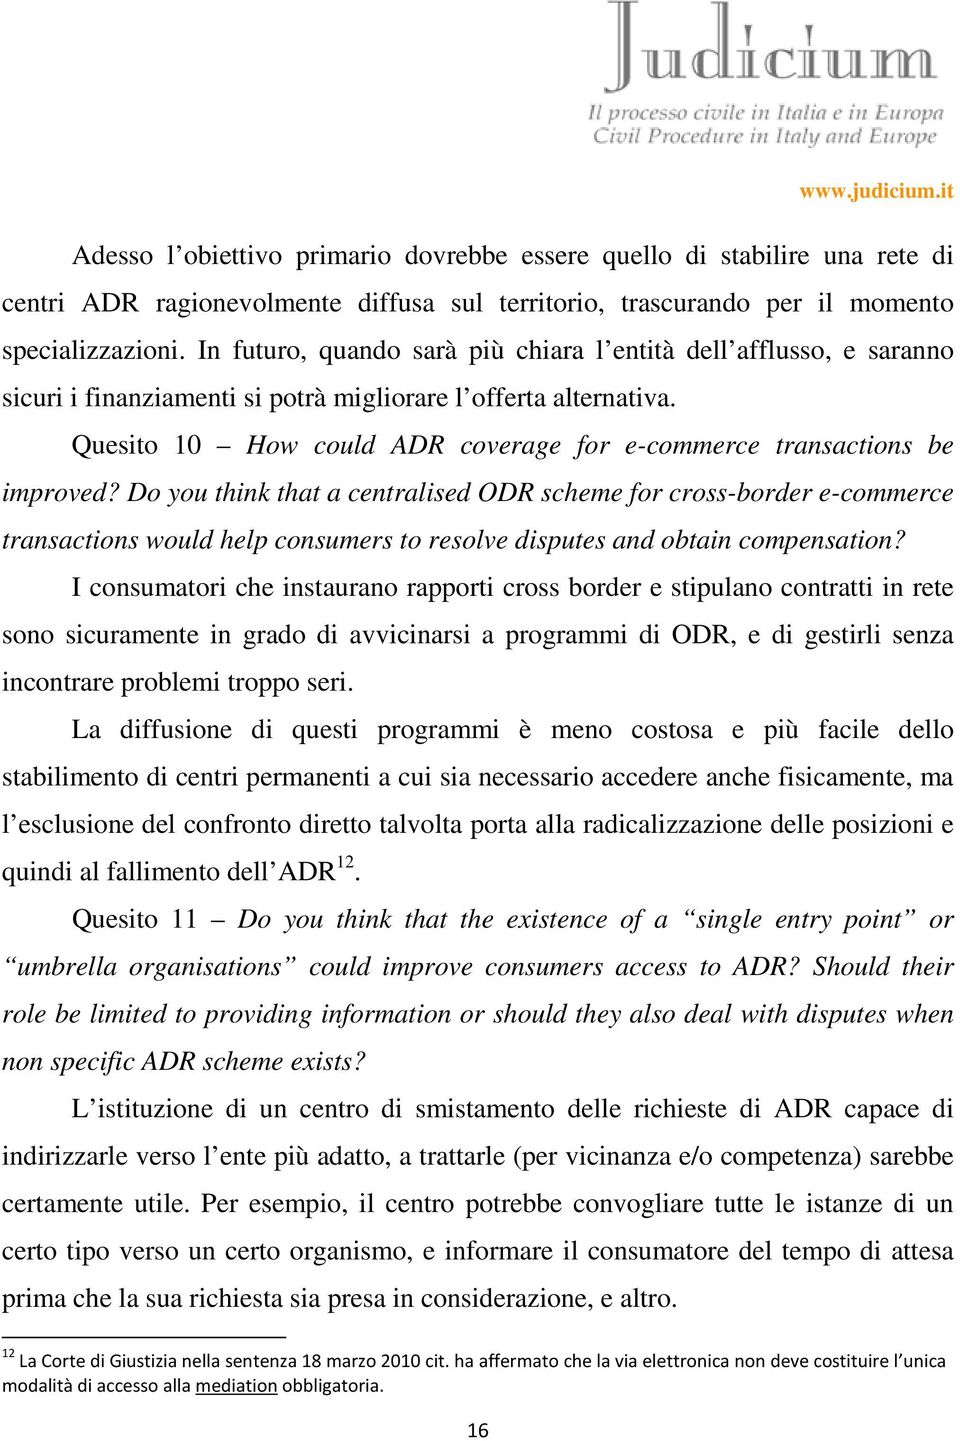 Quesito 10 How could ADR coverage for e-commerce transactions be improved?